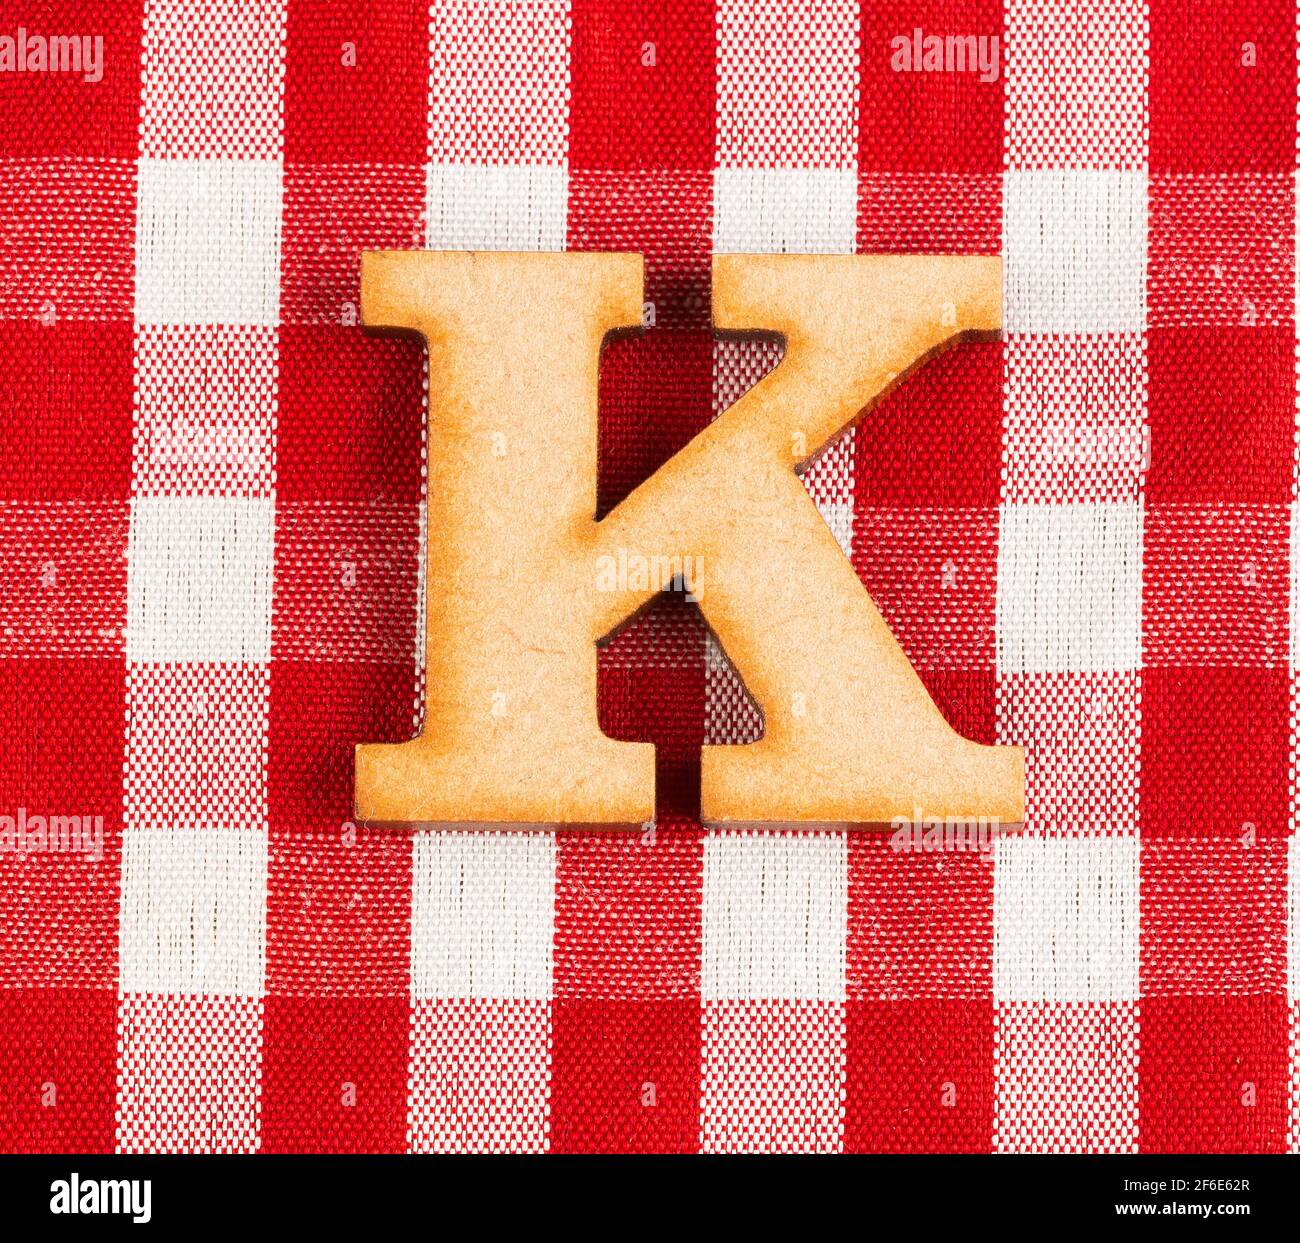 Letter K of the alphabet - Red checkered fabric tablecloth. Stock Photo